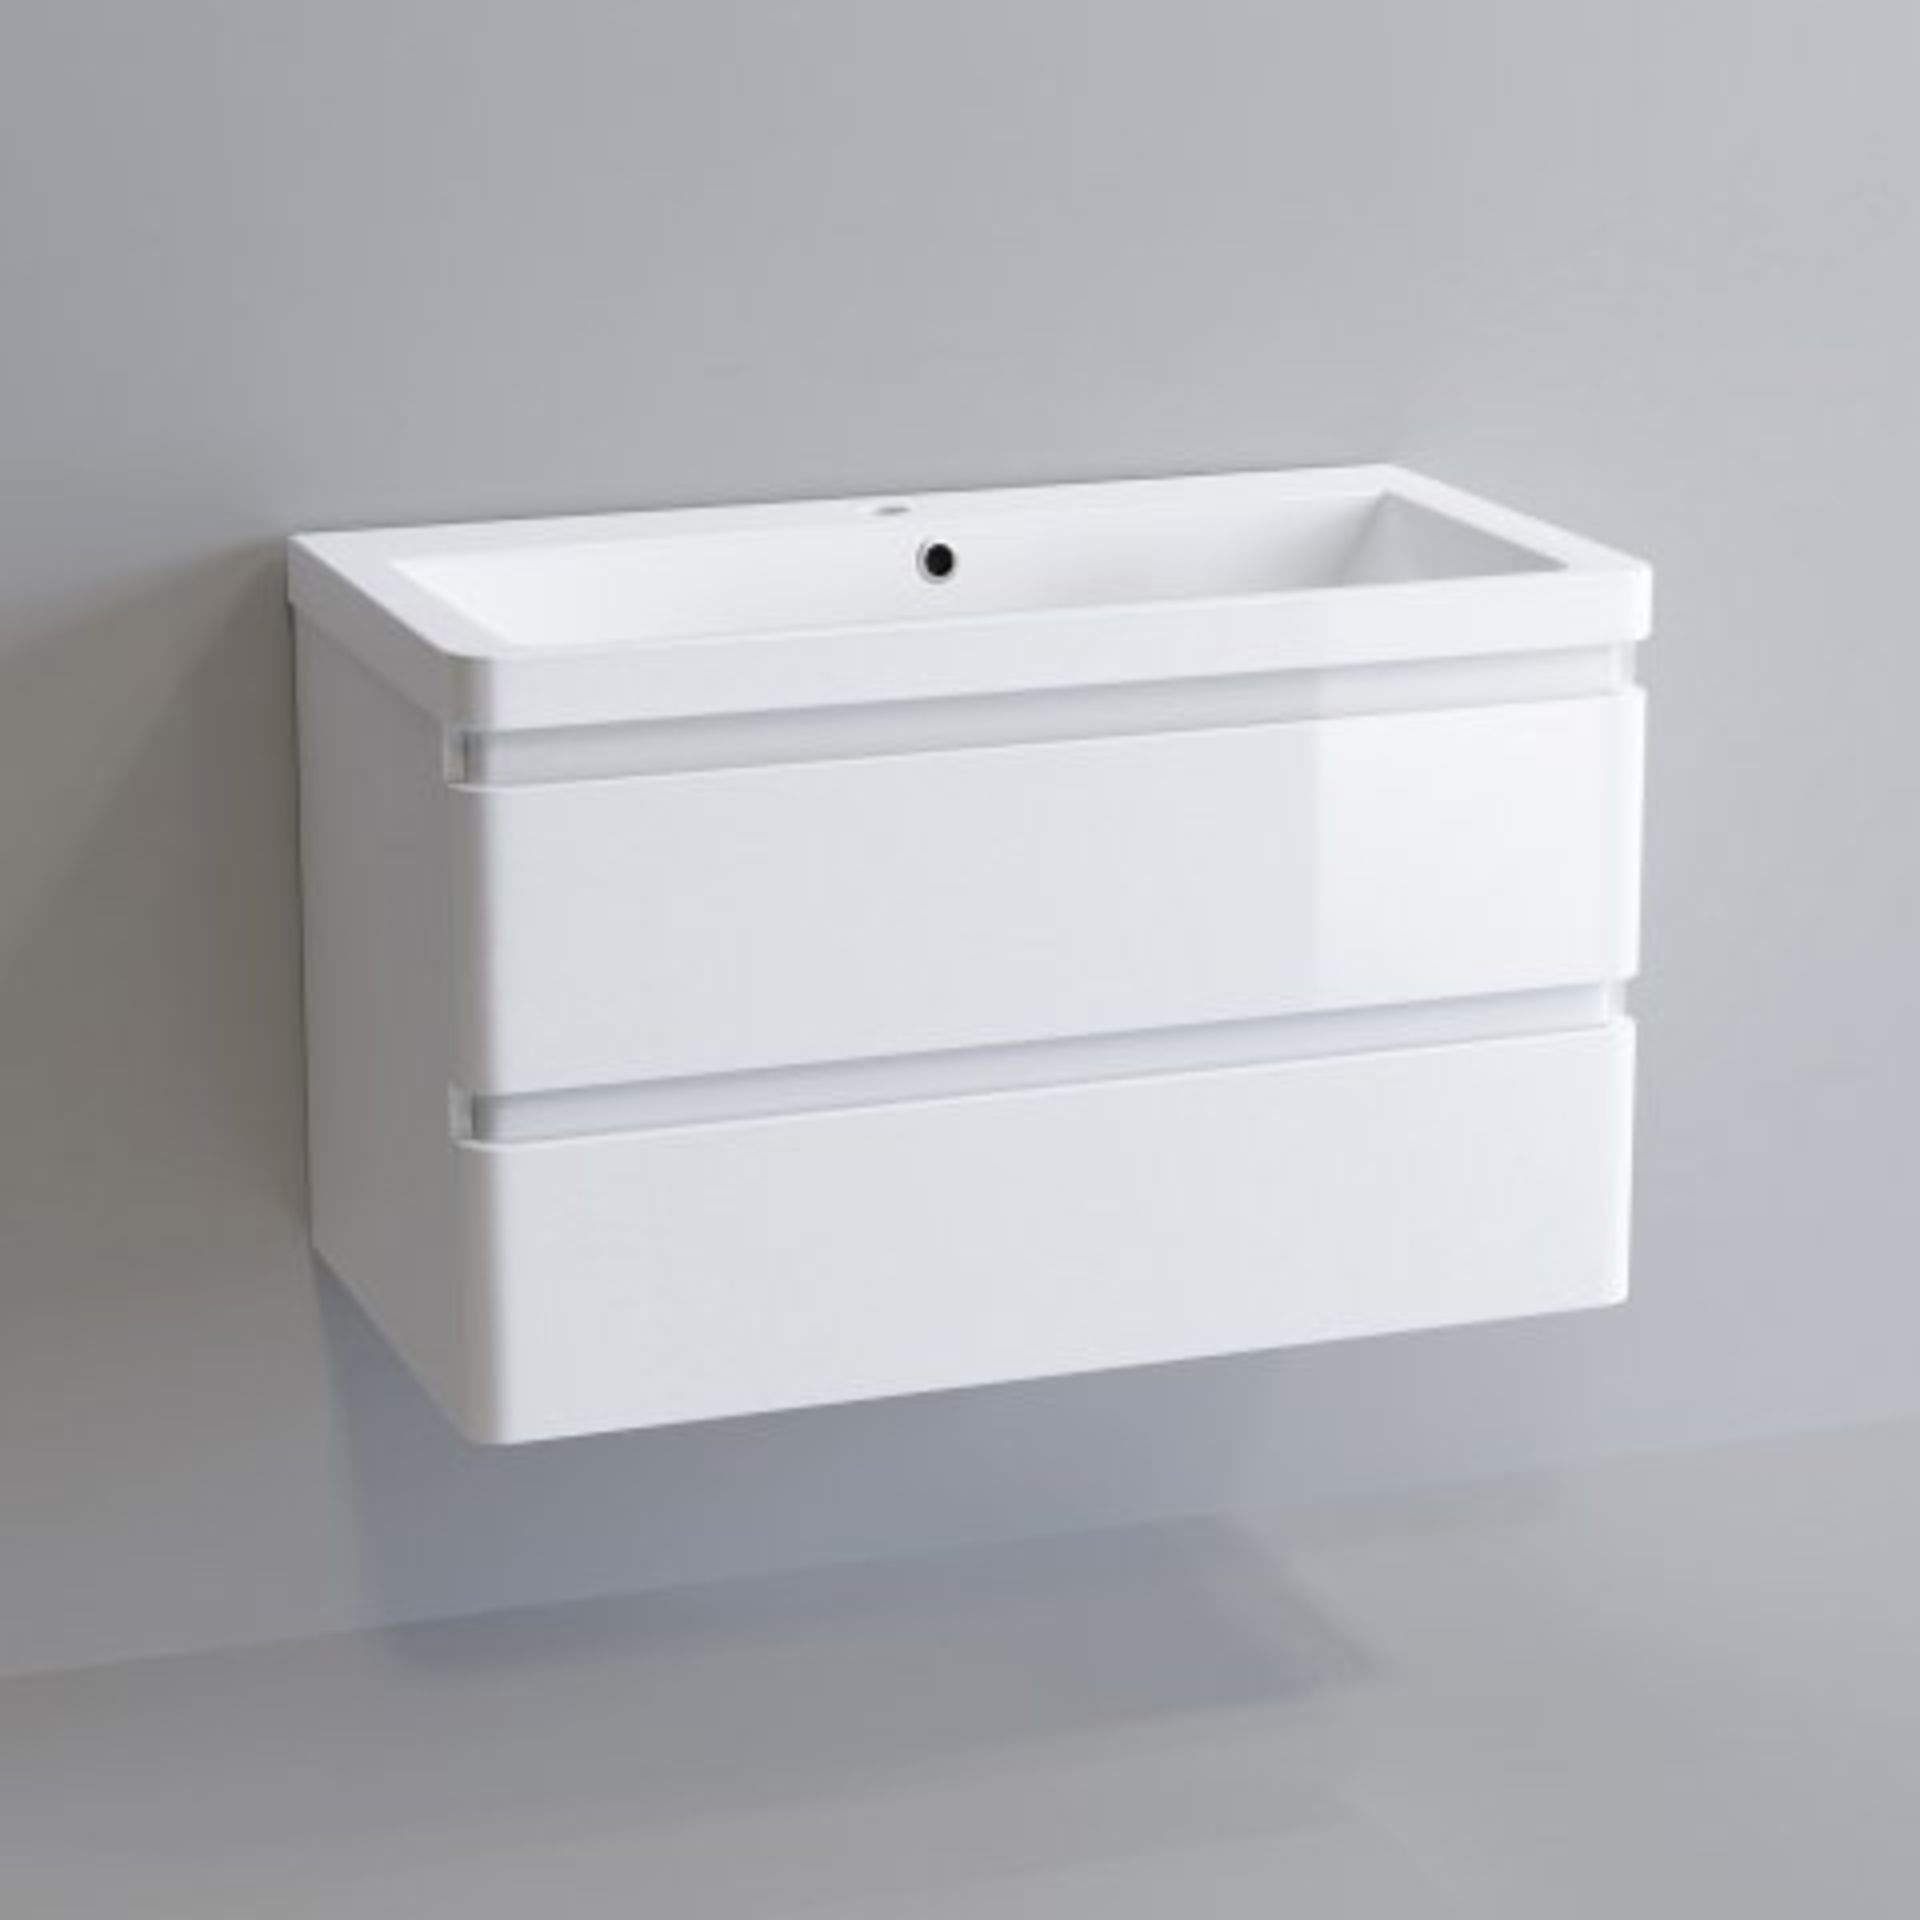 (I25) 800mm Denver II Gloss White Built In Basin Drawer Unit - Wall Hung. RRP £599.99. COMES - Image 3 of 4